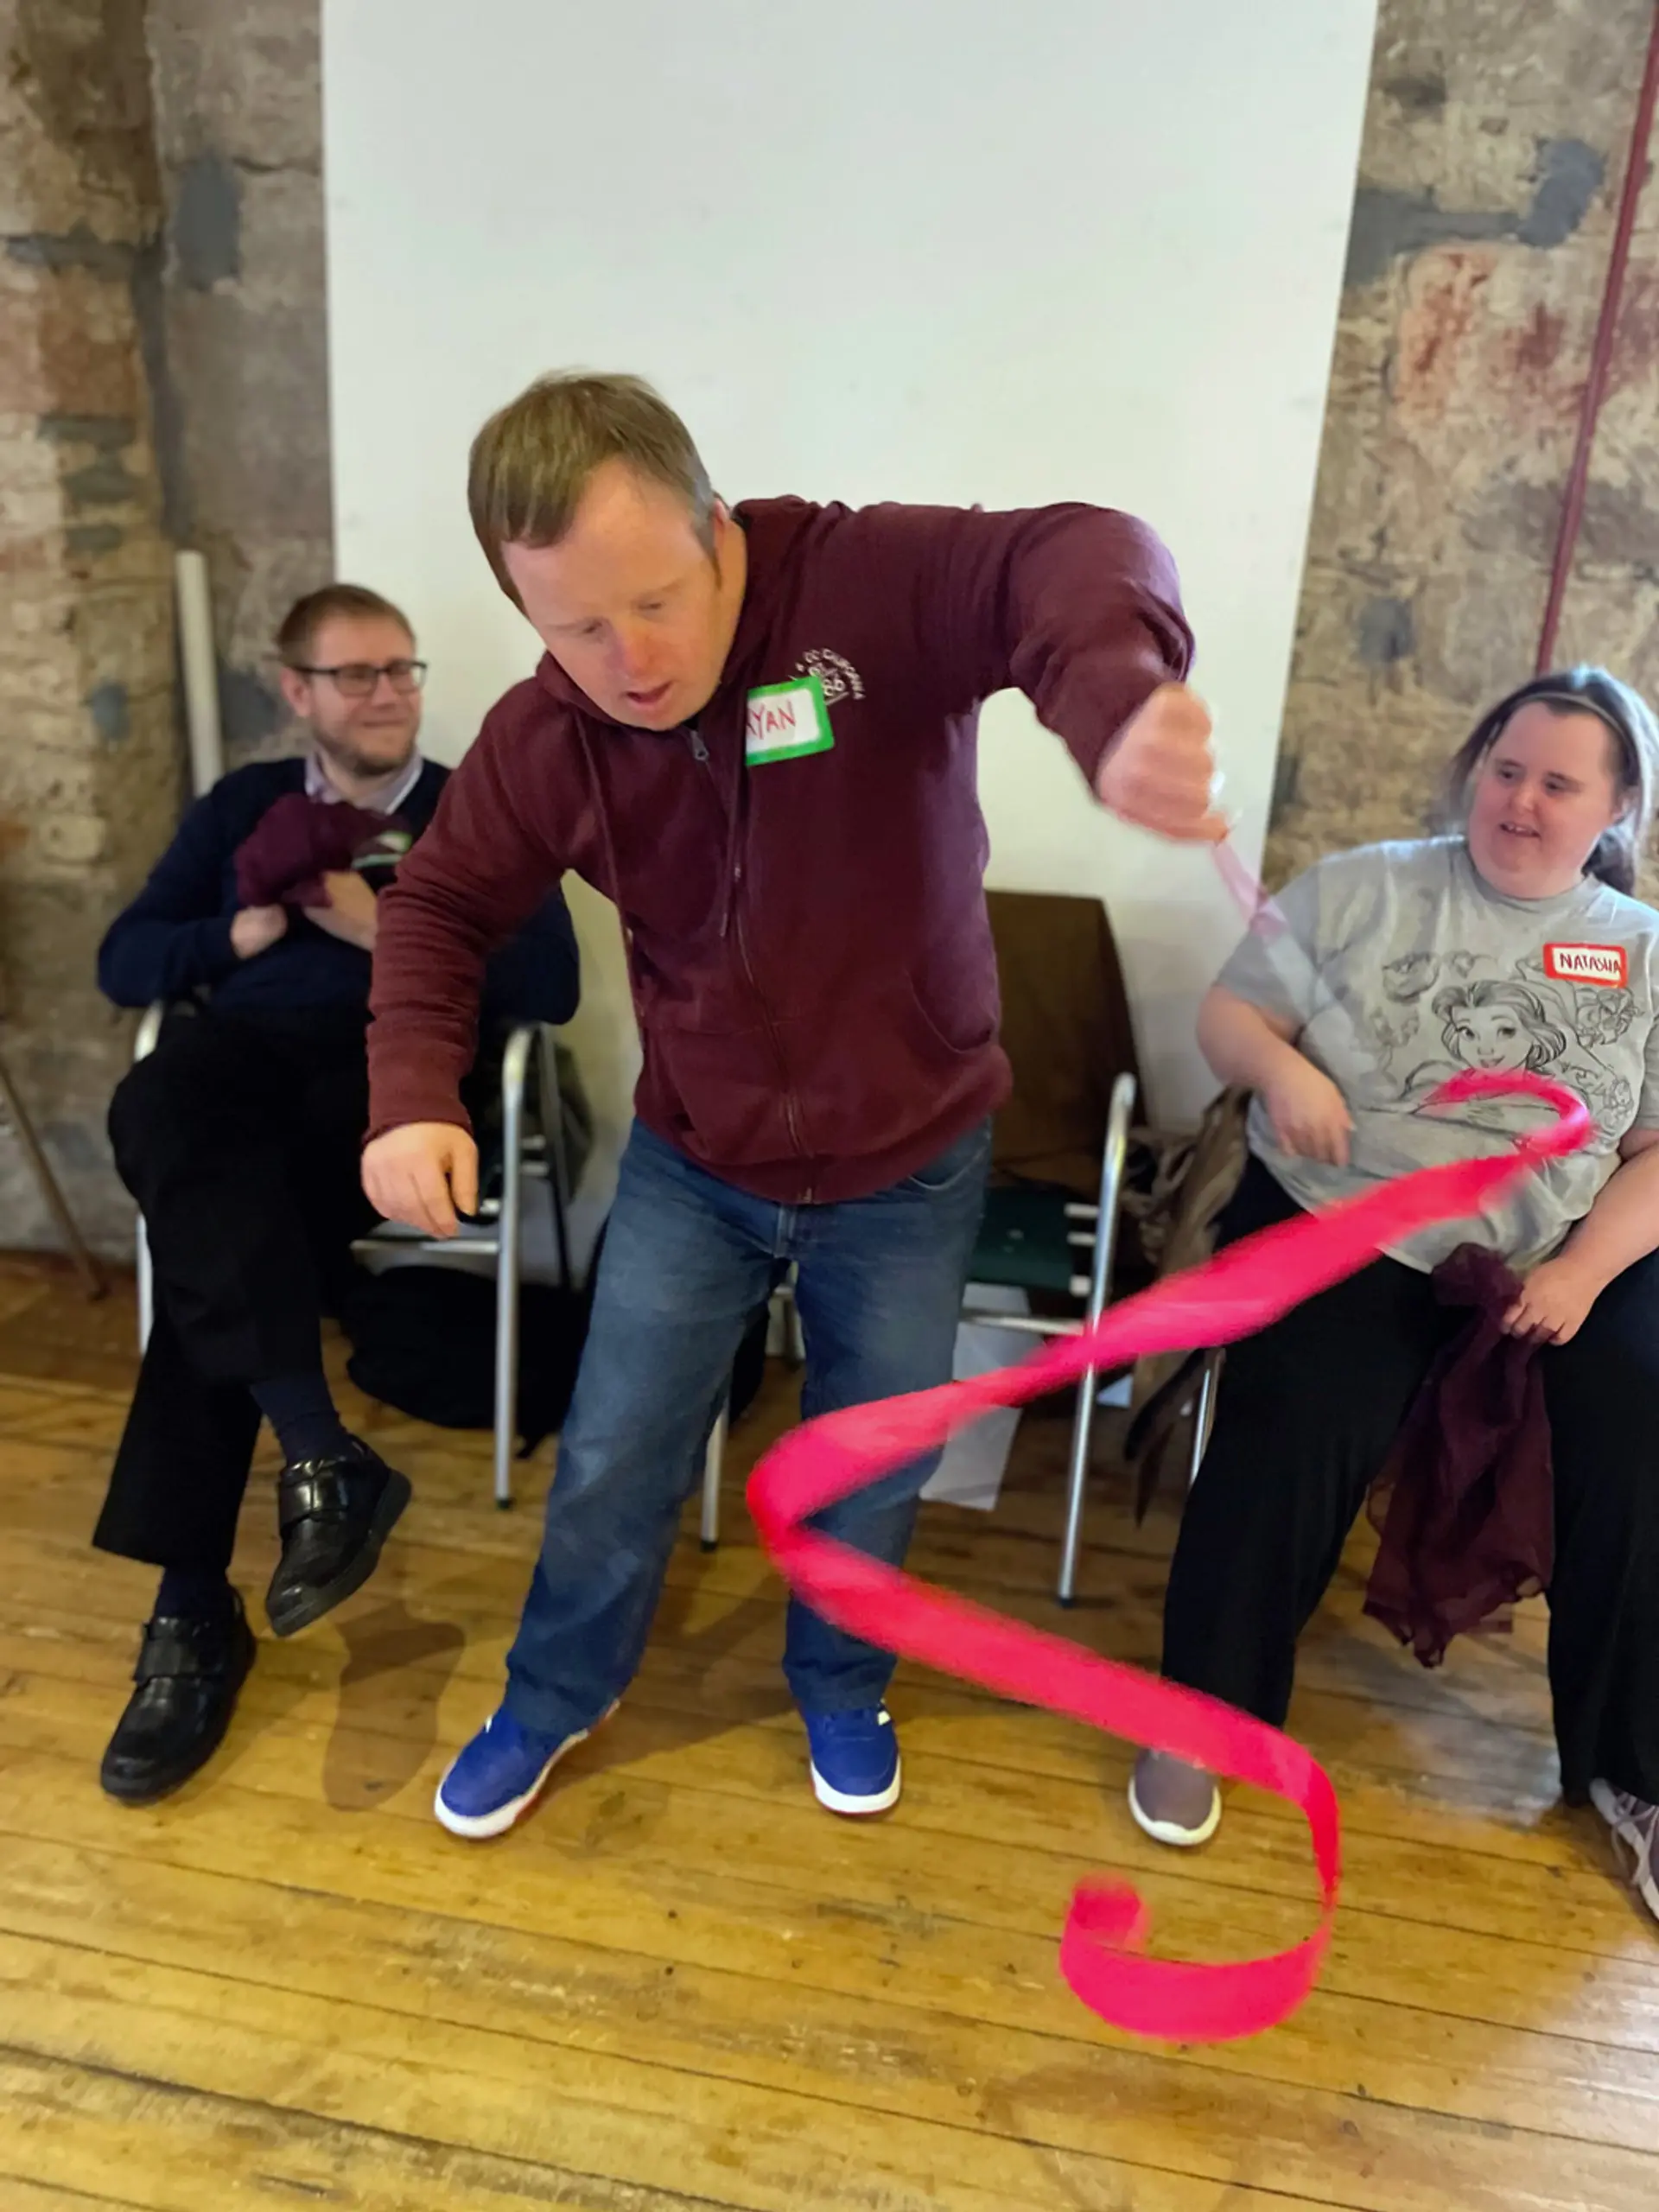 Three people are at a drama workshop. The person in the centre has a name tag on which says ‘Ryan’. He is standing up and holding a bright pink ribbon on the end of a stick, he is spinning it to create a spiral shape. The other two people in the picture are seated and look entertained.